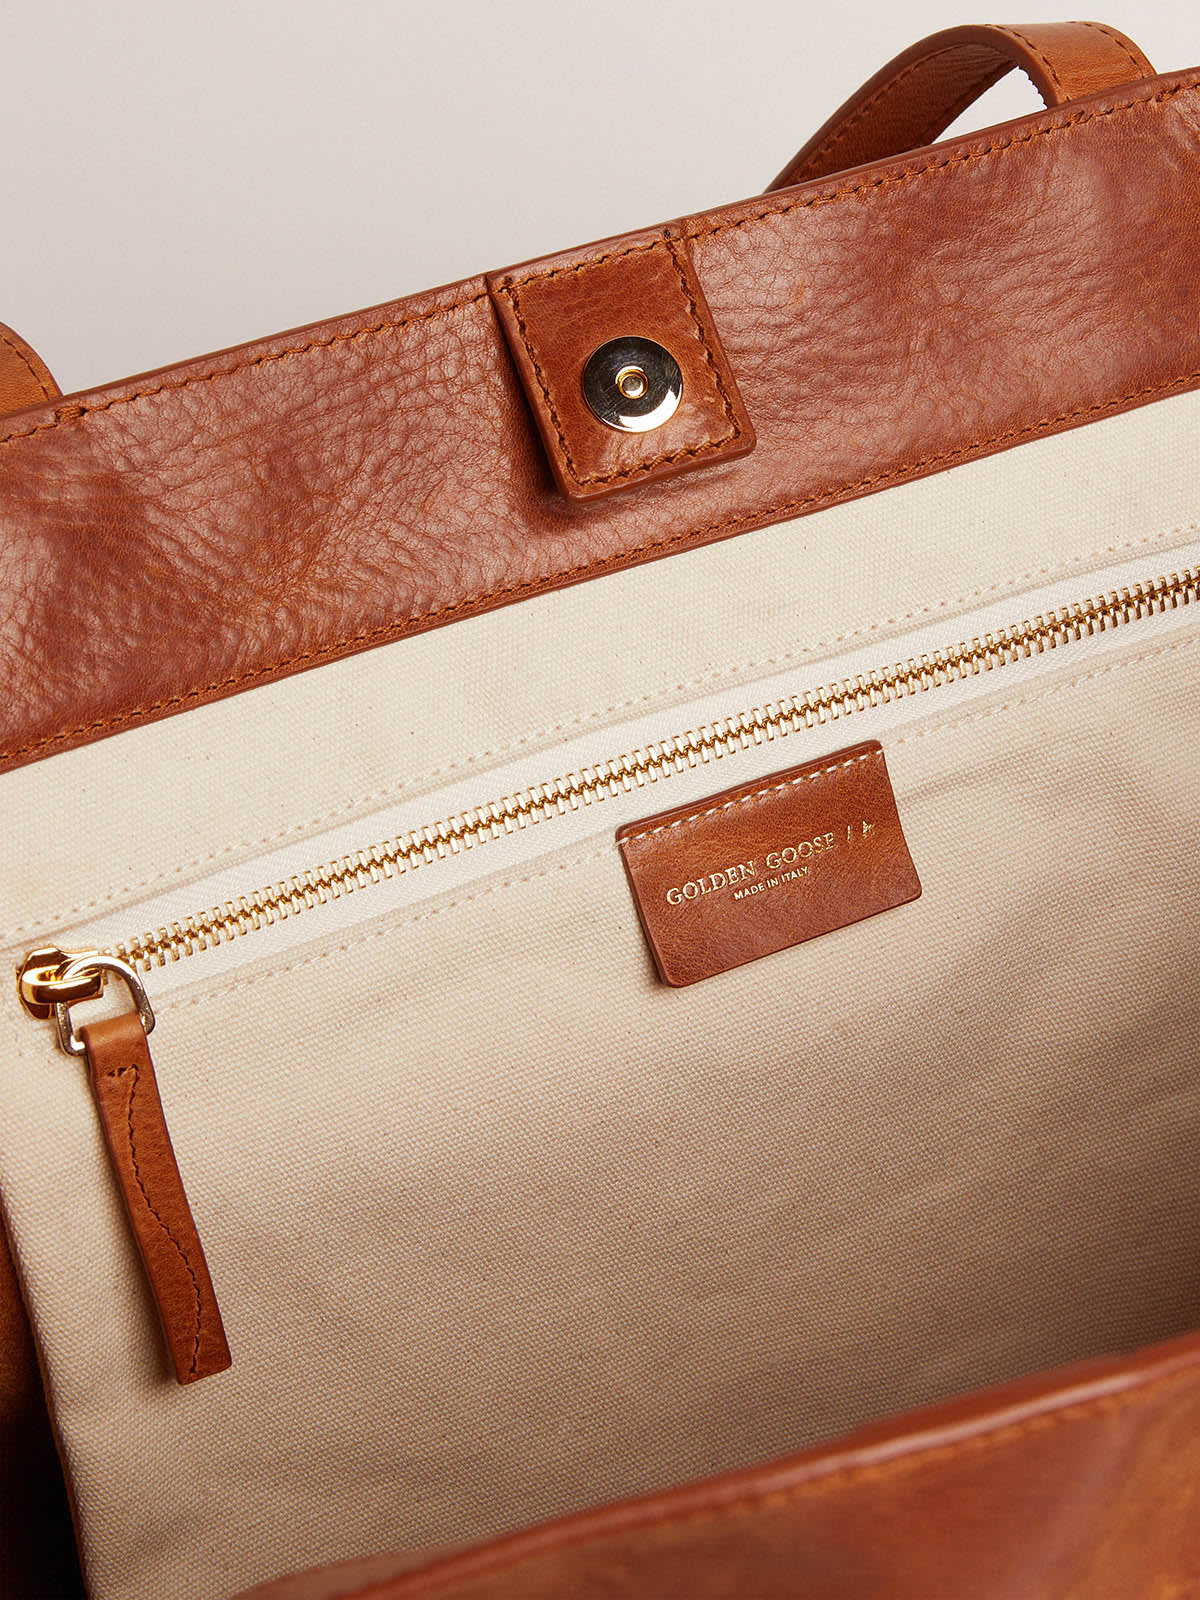 Golden Goose - Pasadena Bag in tan-colored glossy leather with gold logo on the front in 